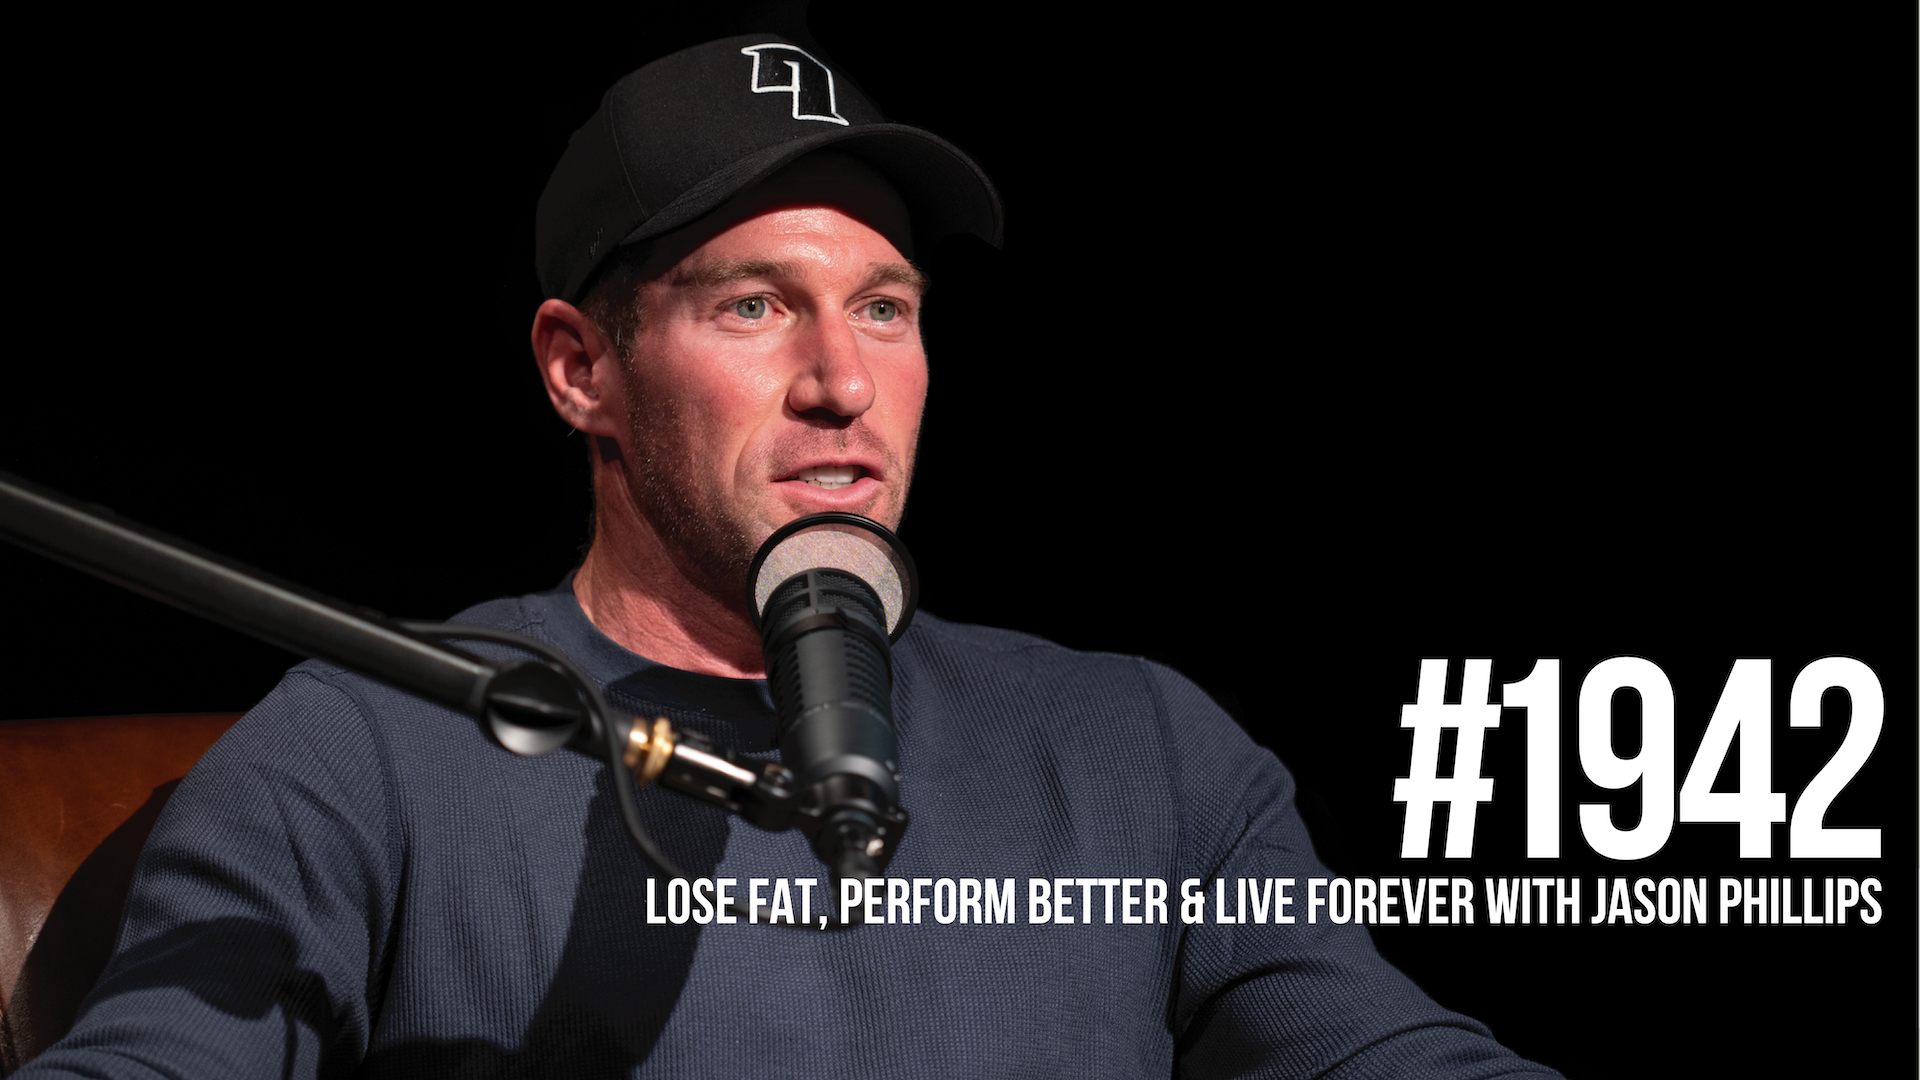 1942: Lose Fat, Perform Better & Live Forever With Jason Phillips